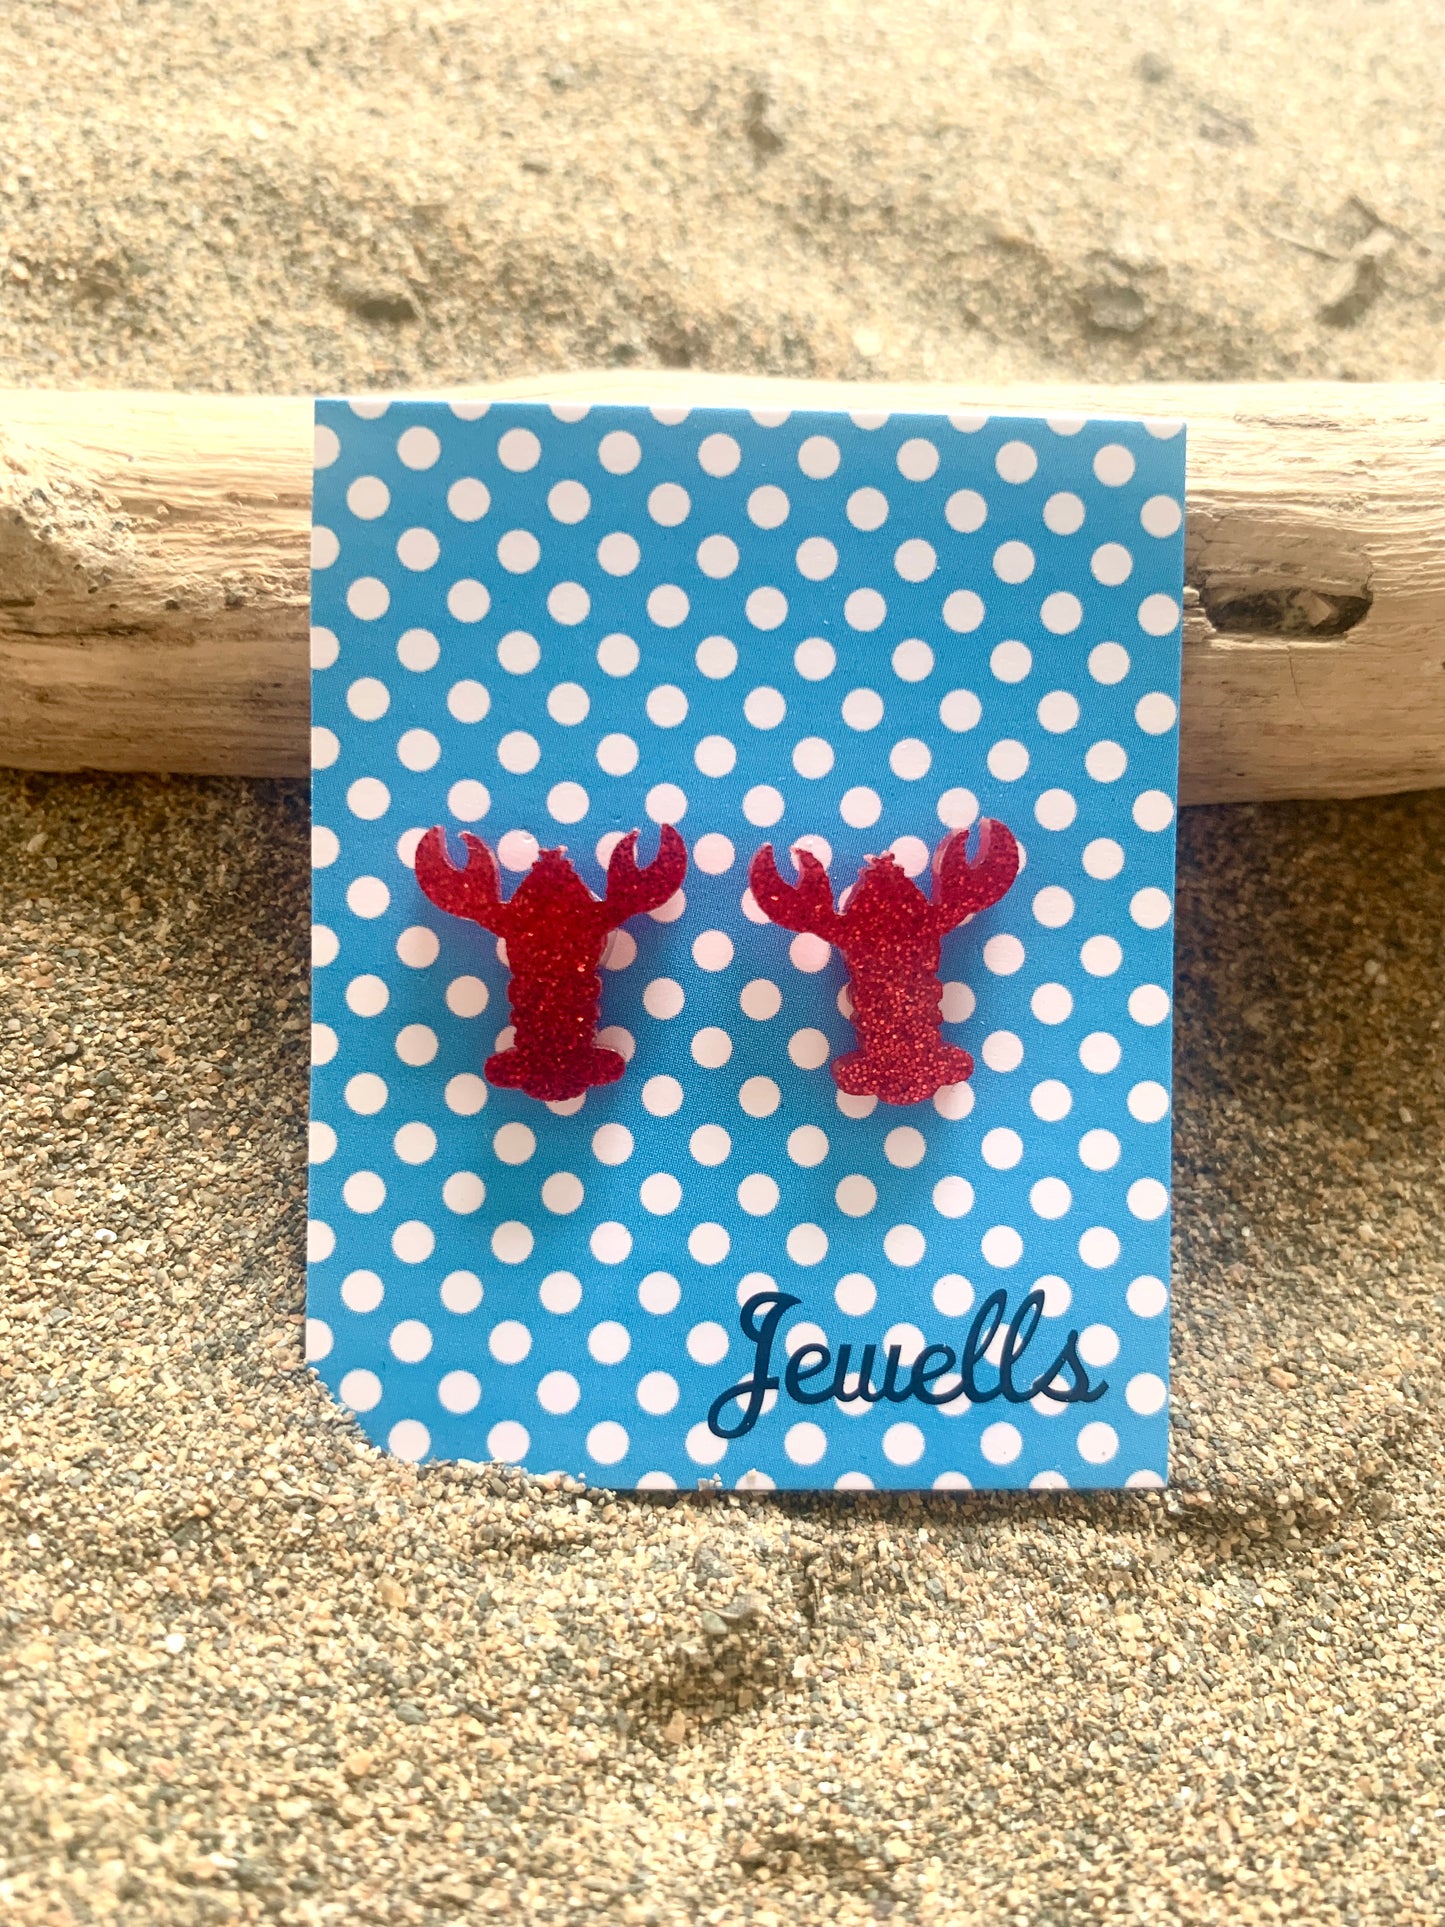 Sparkly Sea Creature Stud Earrings: Lobster, Crab or Whale